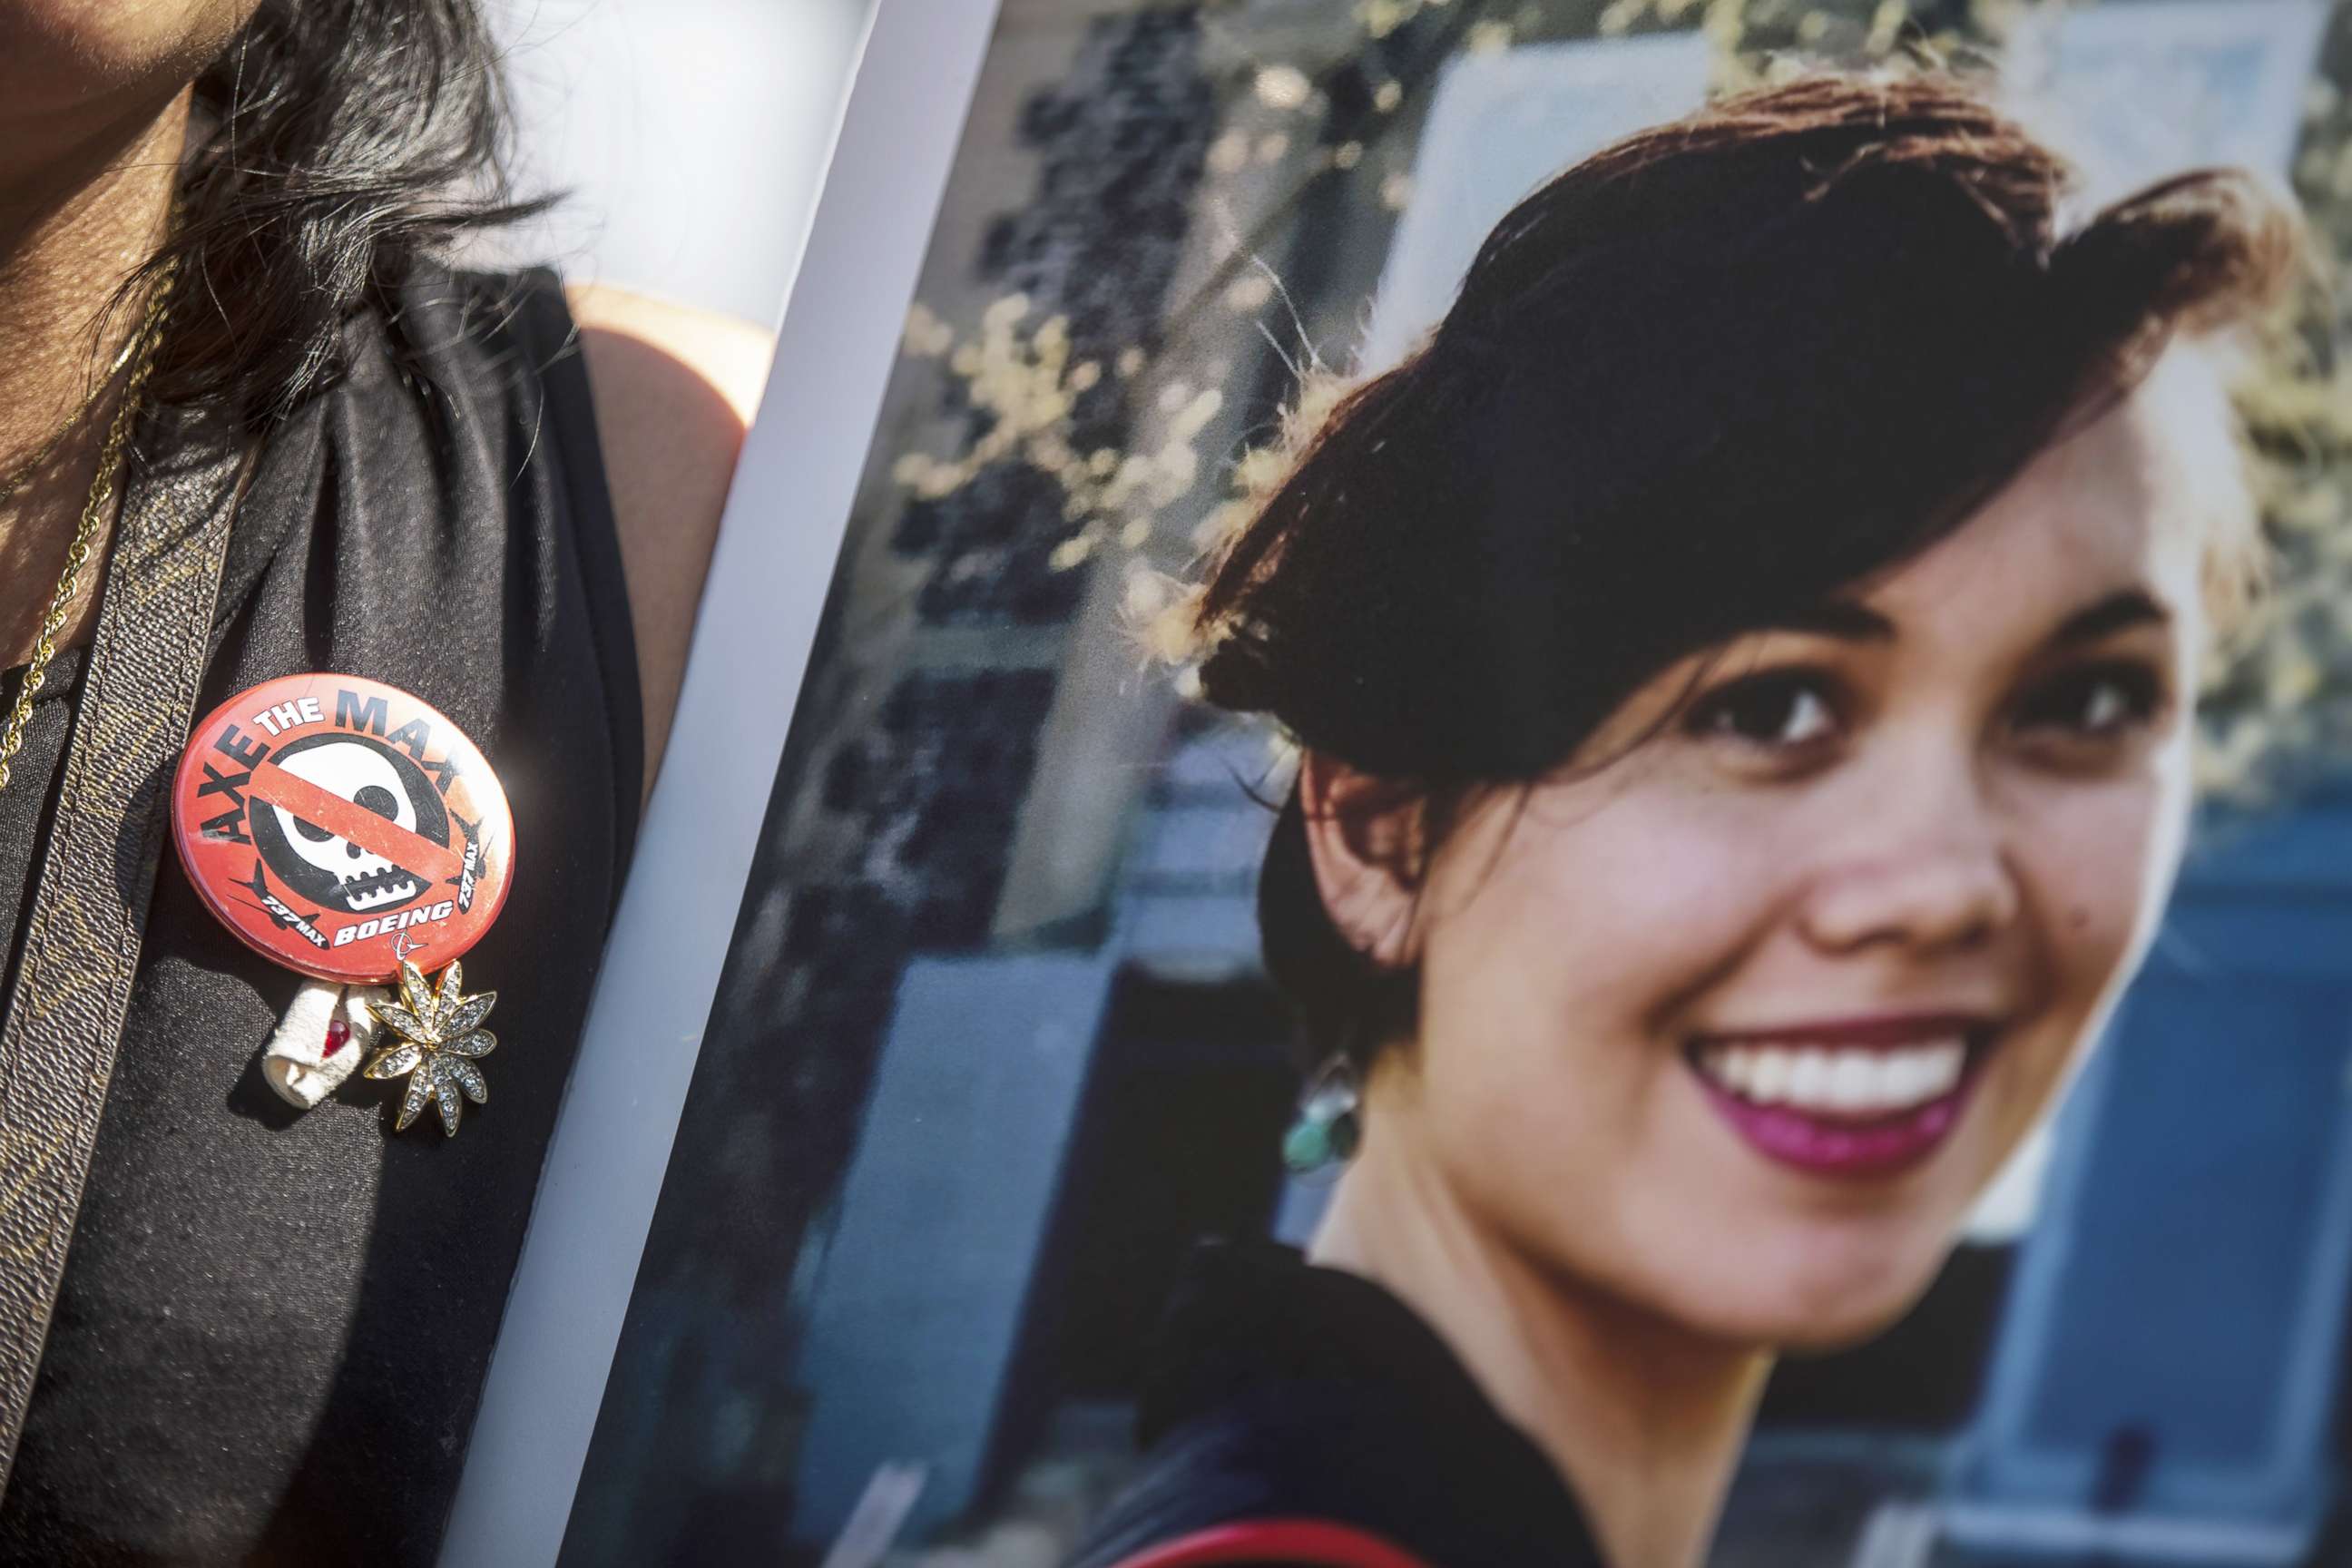 PHOTO: Clariss Moore wears a button calling for the Boeing 737 MAX 8 to be grounded during a vigil for victims of the Ethiopian Airlines Flight ET302 crash on September 10, 2019 in Washington, D.C.